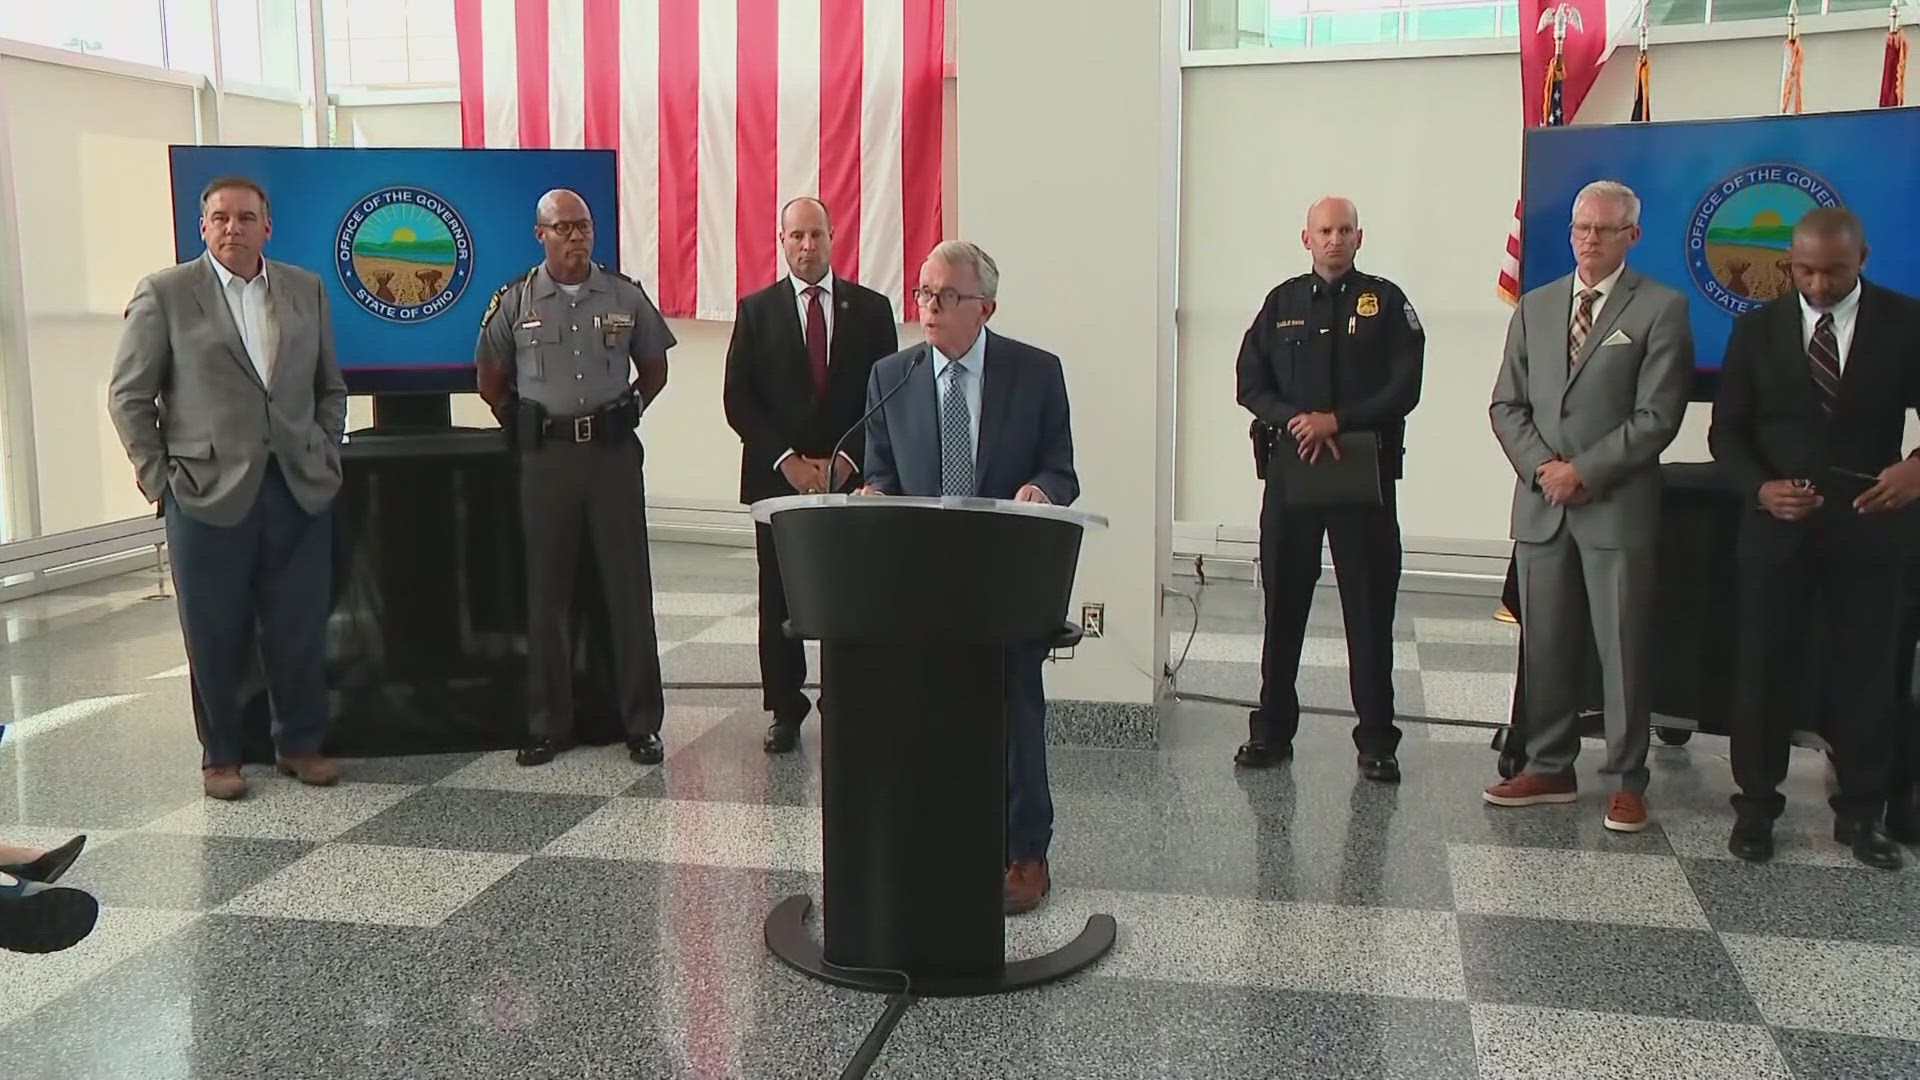 Gov. Mike DeWine and Columbus Mayor Andrew Ginther announced a new initiative aimed at preventing gun violence in central Ohio during a press conference Tuesday.